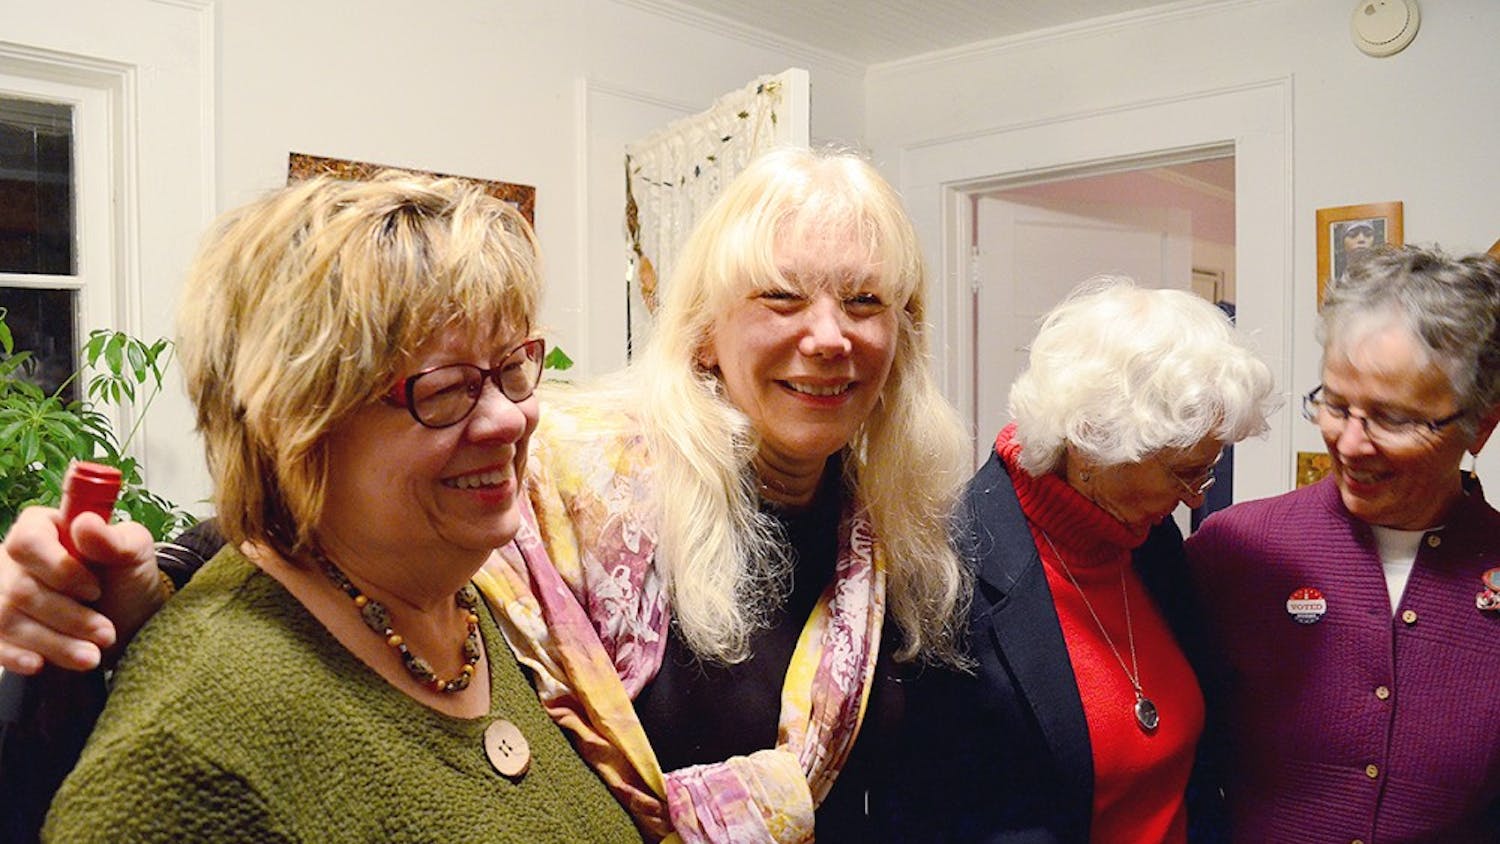 	Randee Haven-O’Donnell (second from left) celebrates her election
win with Diana McDuffee, Ellie Kinnaird and Melva Okun.